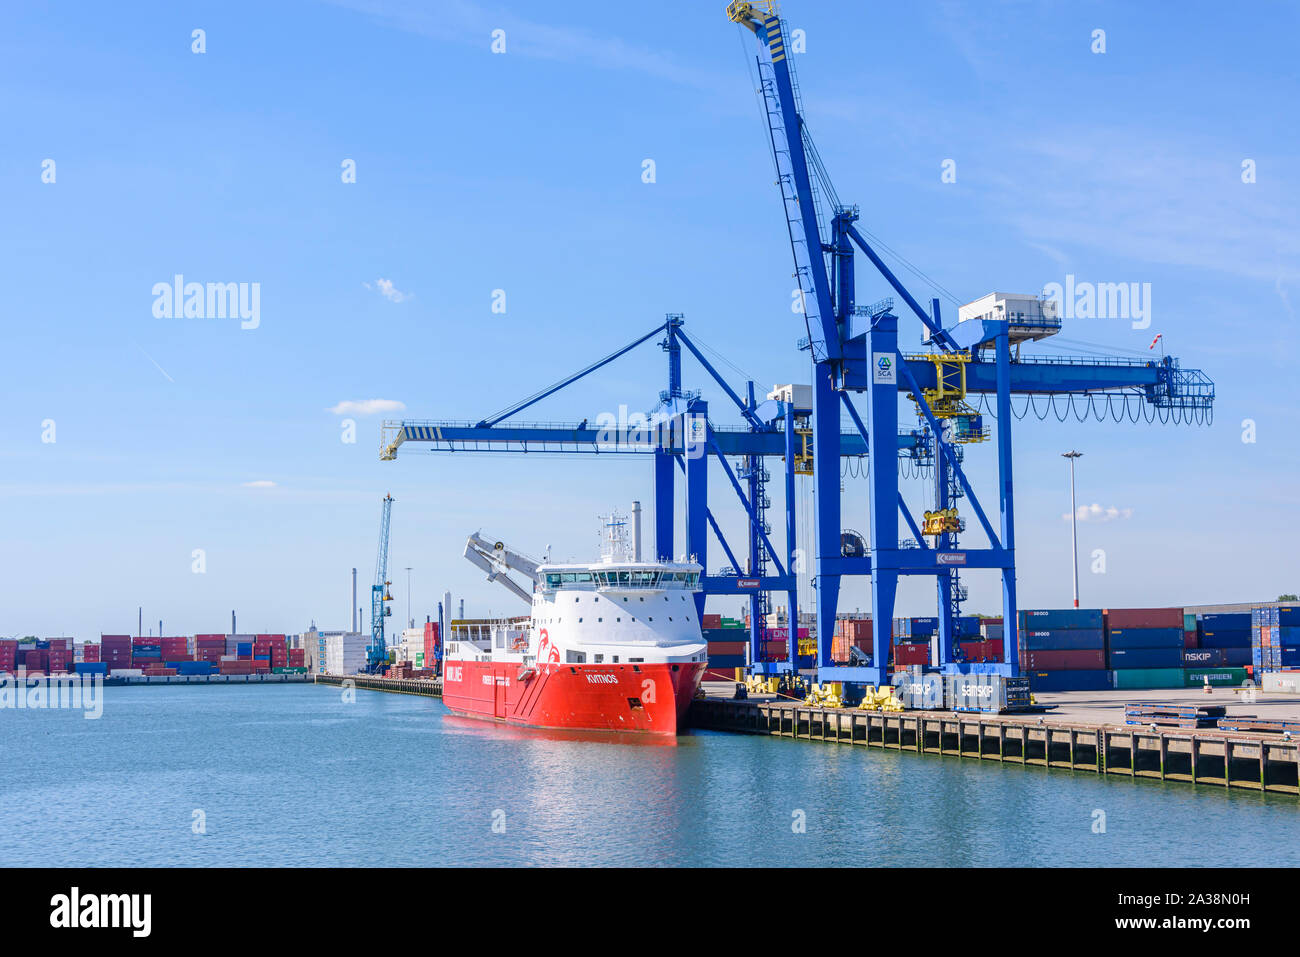 Cranes for removing ISO shipping containers from freight ships at the Port of Rotterdam, Netherlands. Stock Photo